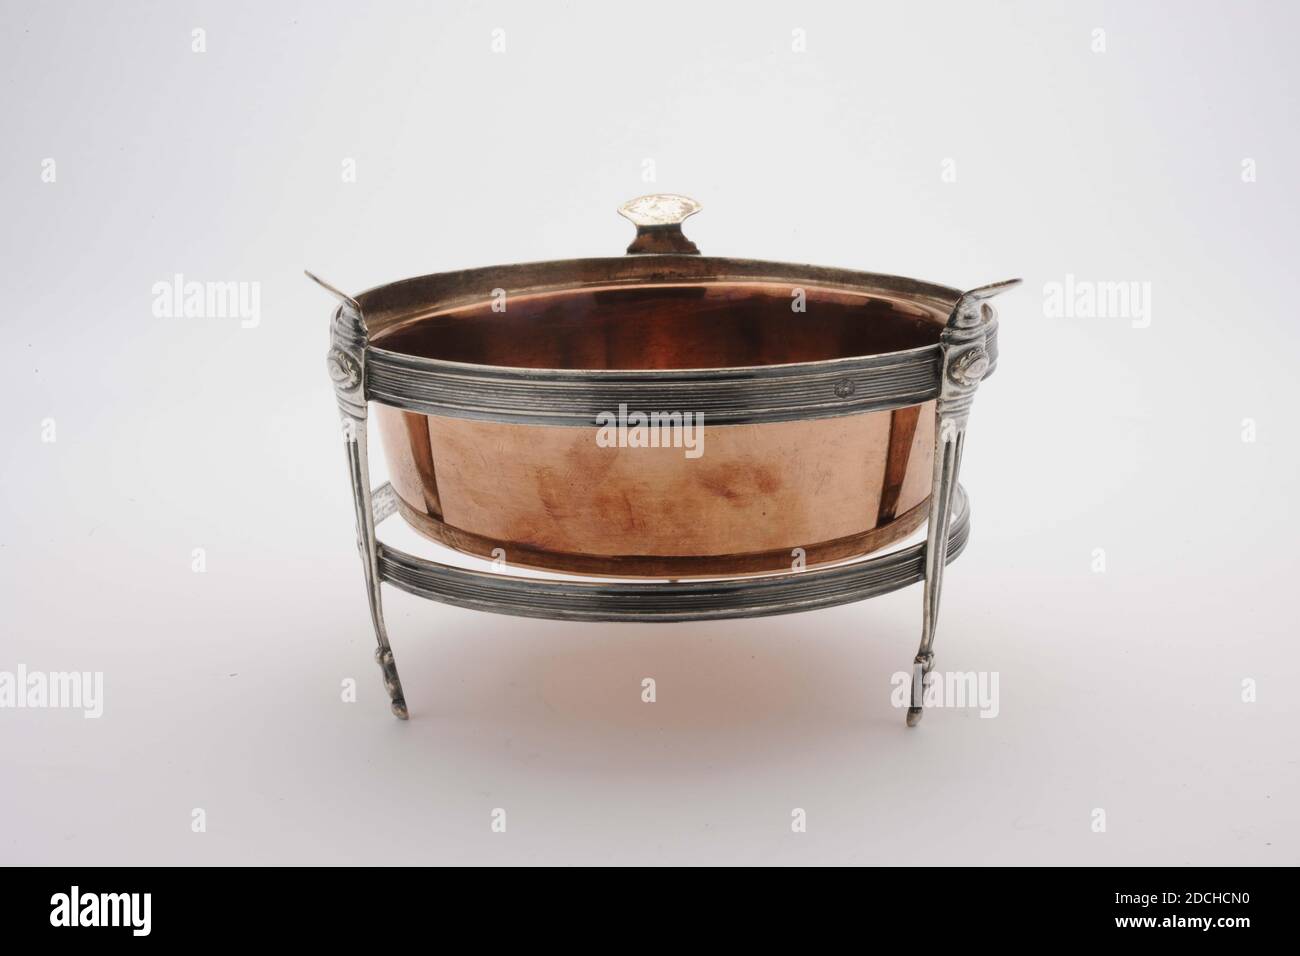 Chafing dish, Hendrikus Johan Schretlen, 1824, copper, silver, engraved, Total: 8.2 x 13.2cm (82 x 132mm), Chafing dish: 3.6 x 11.6cm (36 x 116mm), Holder: 8.2 x 13.2cm (82 x 132mm), Pipe brazier with the round brazier made of copper and the holder of silver. The brazier has a narrow, outward edge. The holder is decorated with engraved concentric lines and stands on three legs. Holder is marked, 1995 Stock Photo